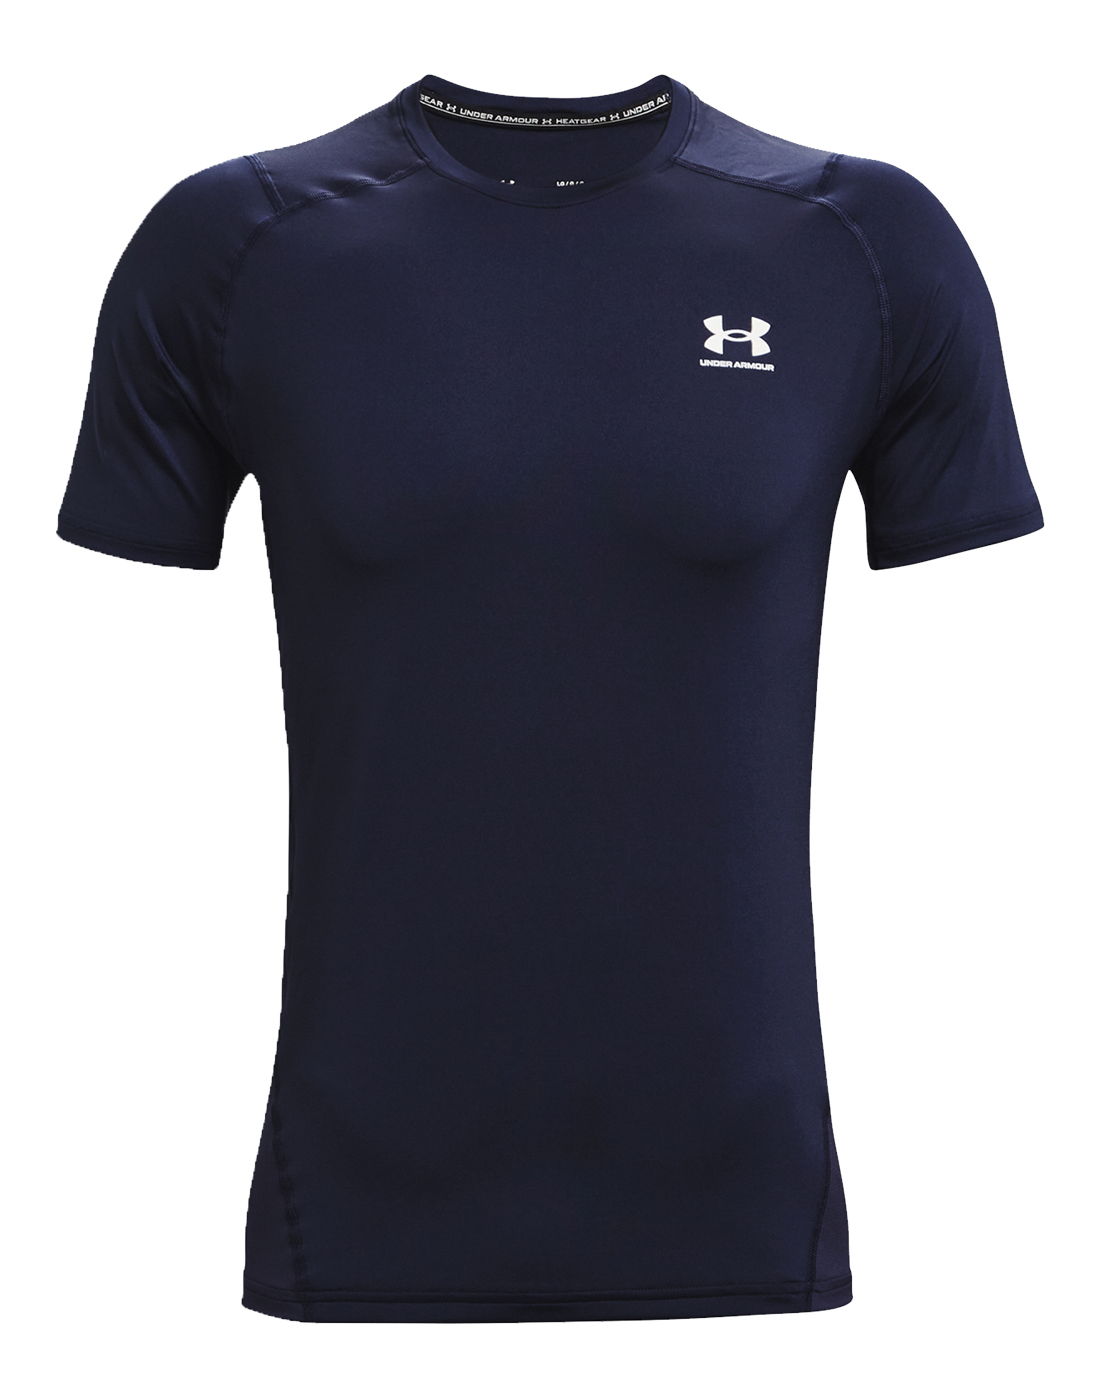 Under Armour Mens Heat Gear Armour Fitted T-Shirt - Navy | Life Style ...